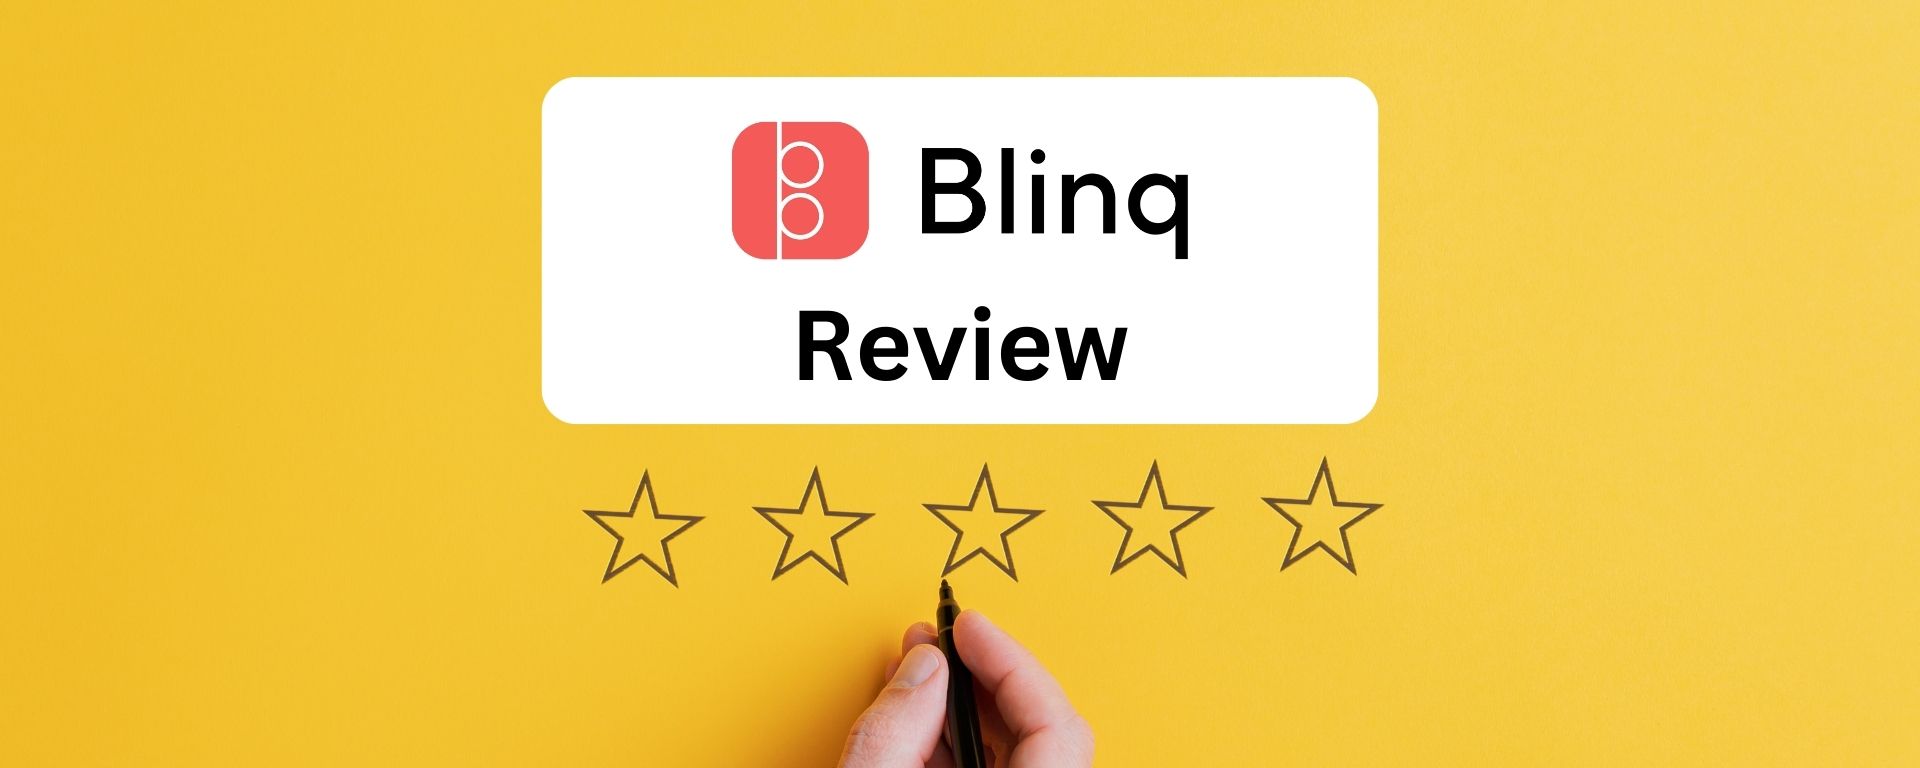 Blinq Business Card Review - Feature Image